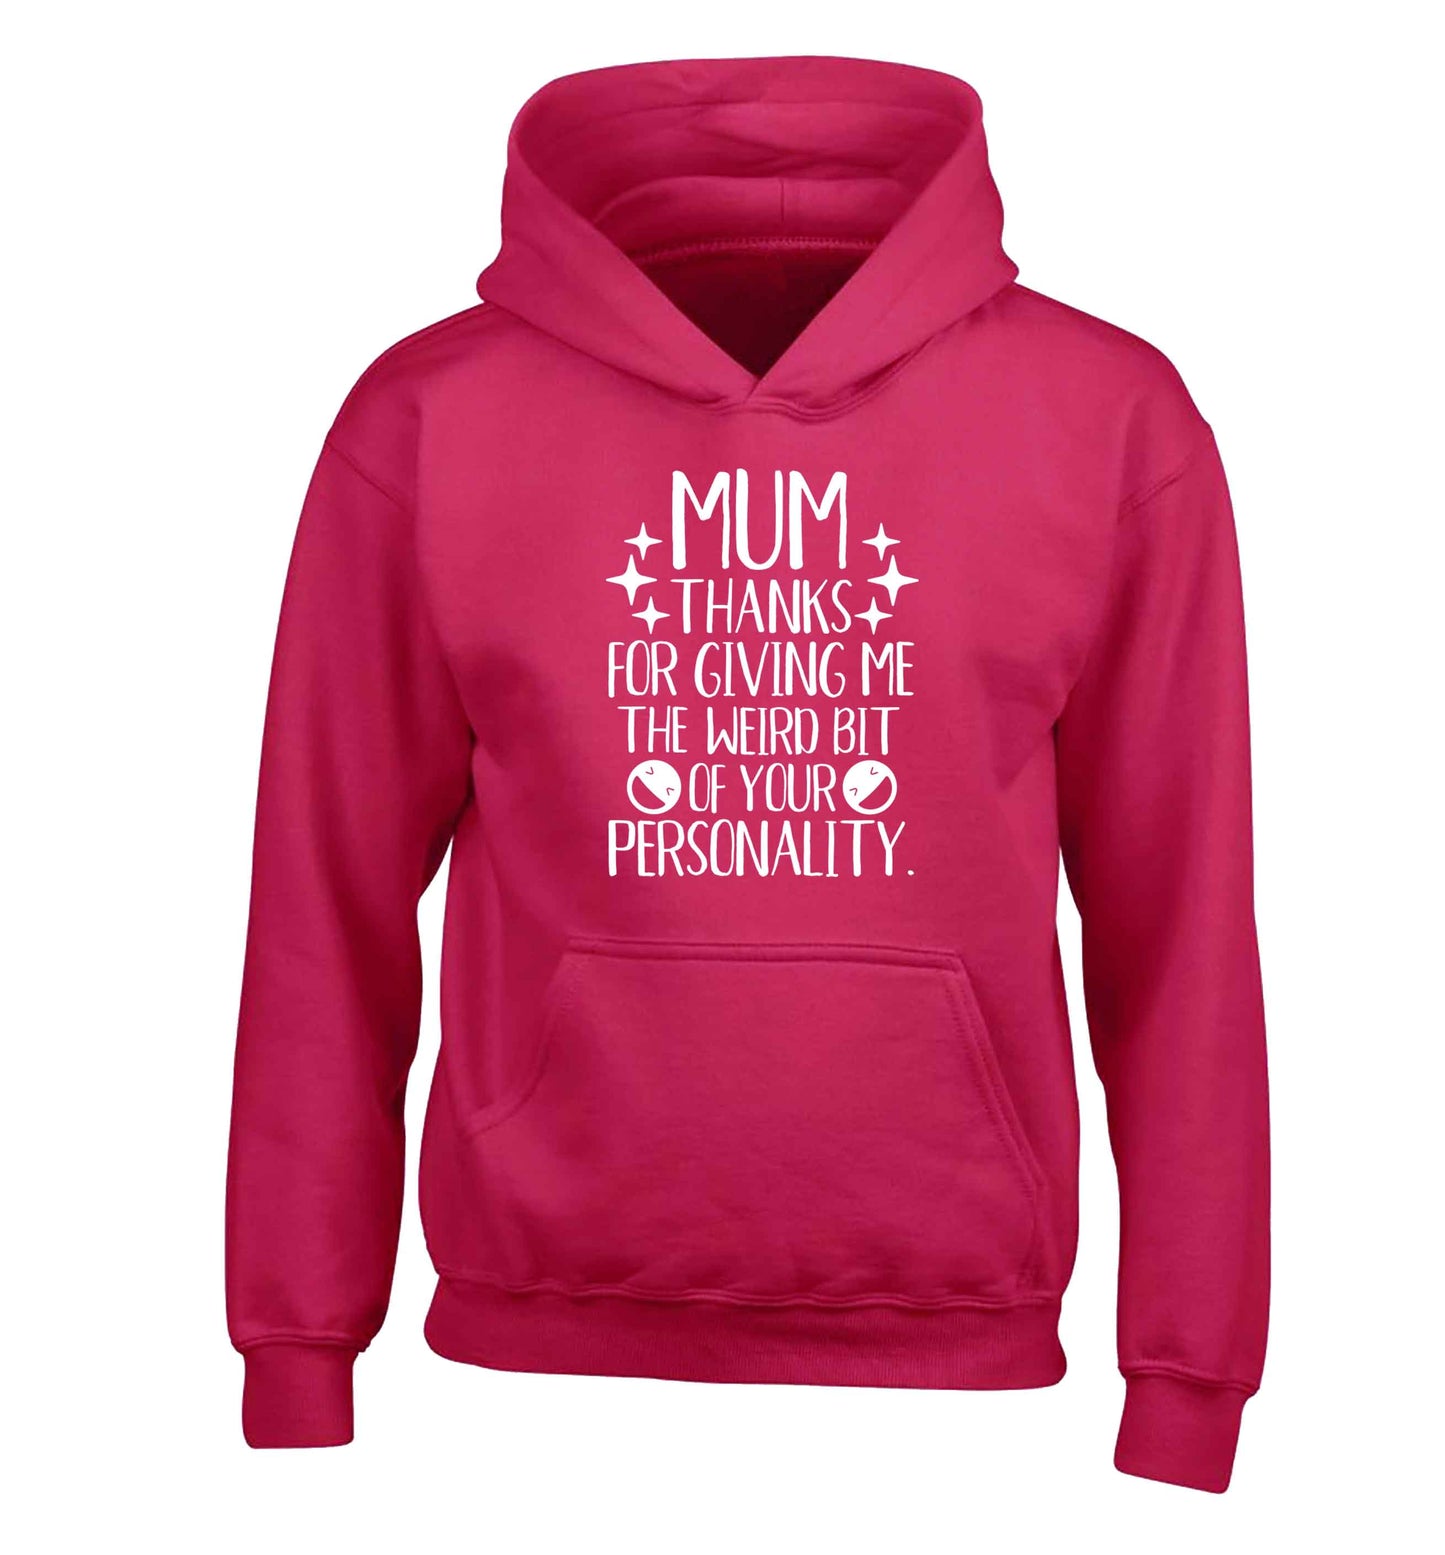 Mum thanks for giving me the weird bit of your personality children's pink hoodie 12-13 Years